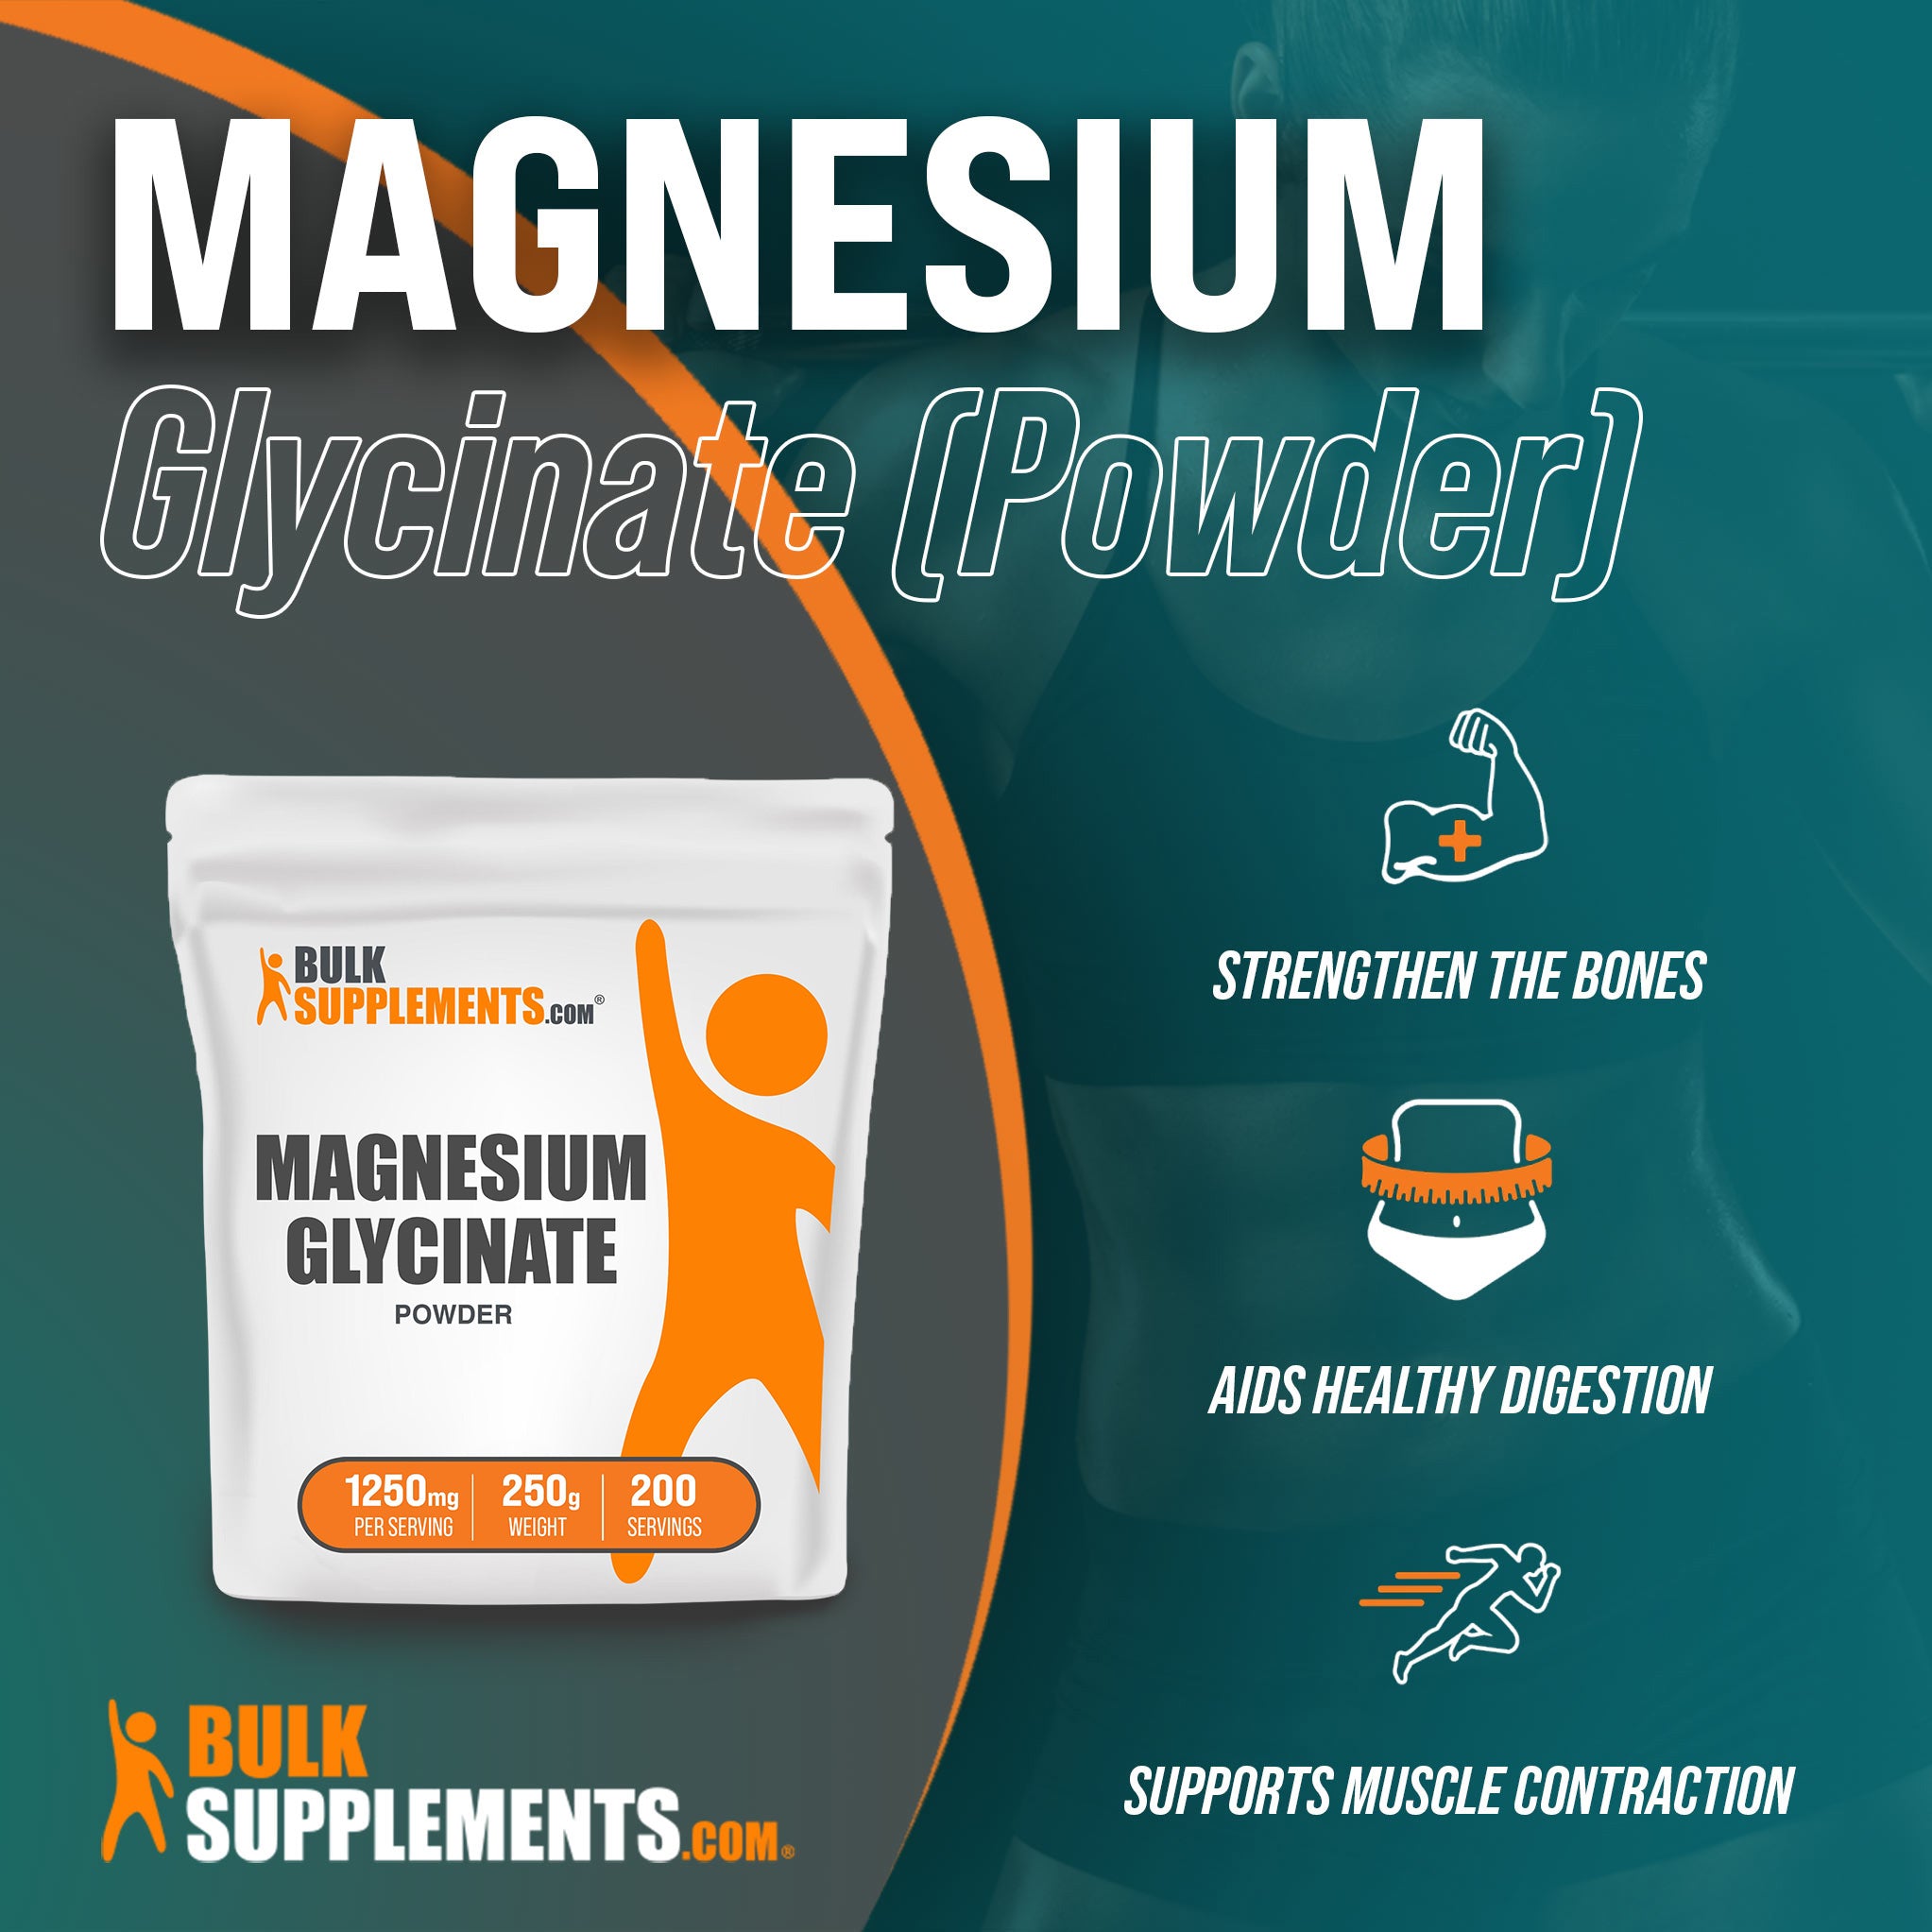 Benefits of Magnesium Glycinate: strengthen the bones, aids healthy digestion, supports muscle contraction